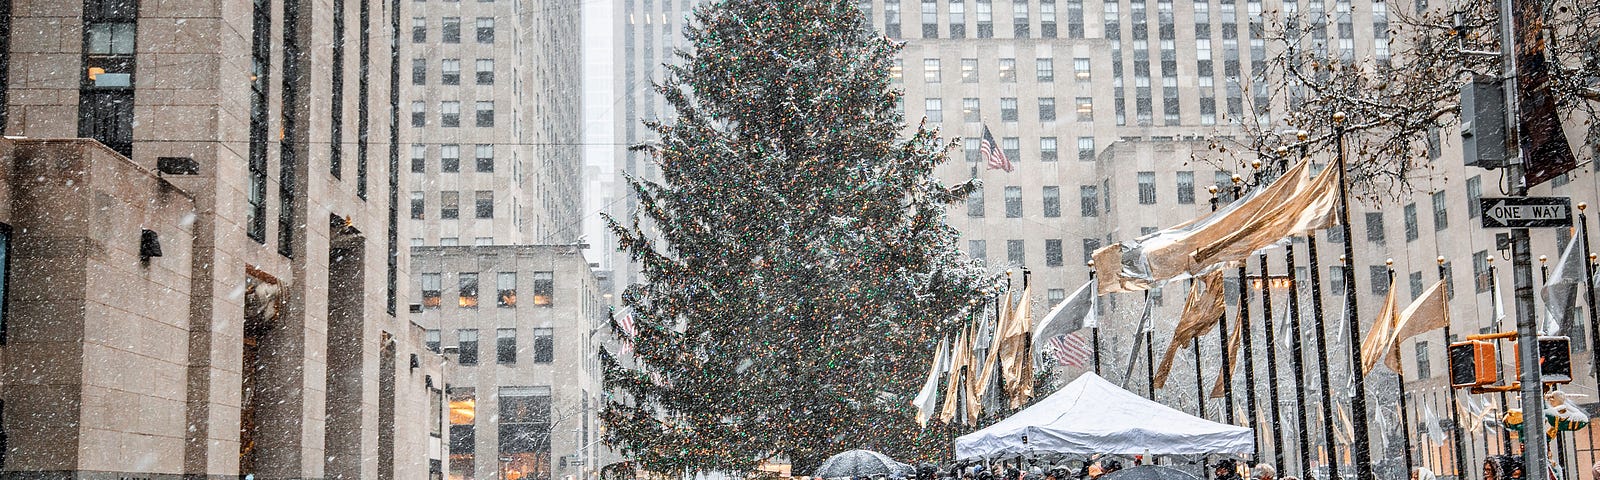 Photo of a crowded street in New York City during the Christmas holiday.